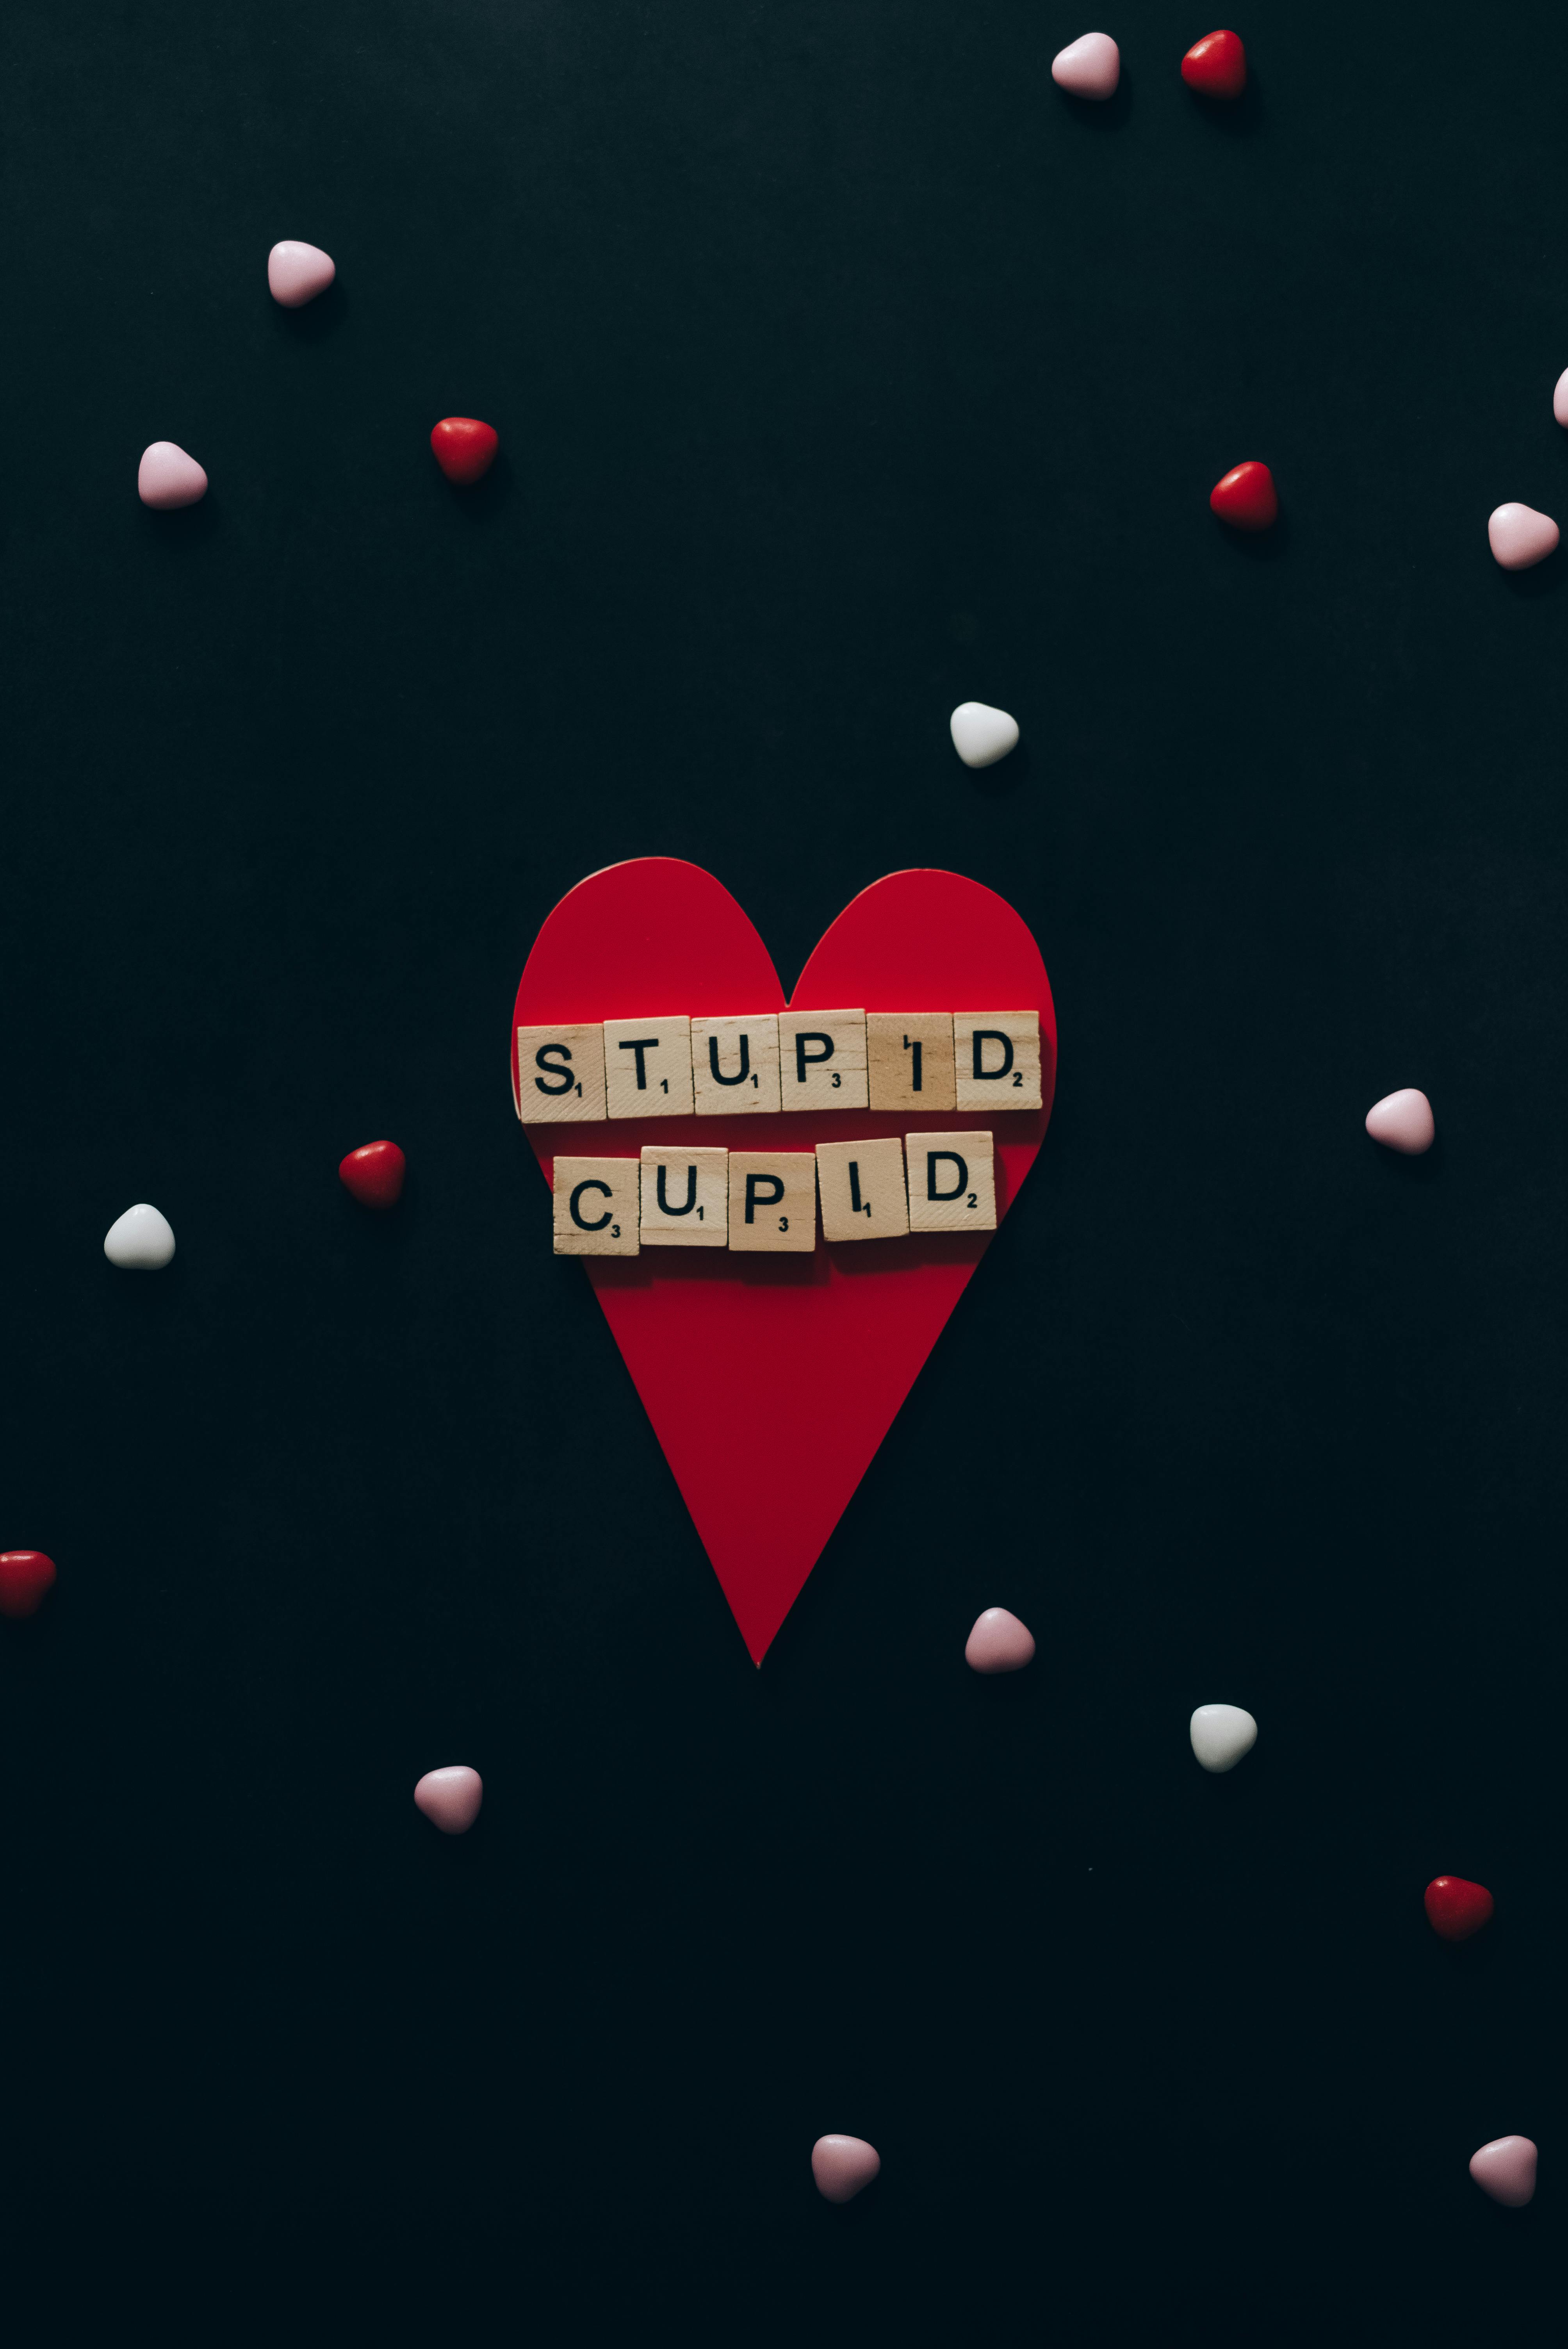 Cupid background stock photo. Image of card, wings, heart - 13787648